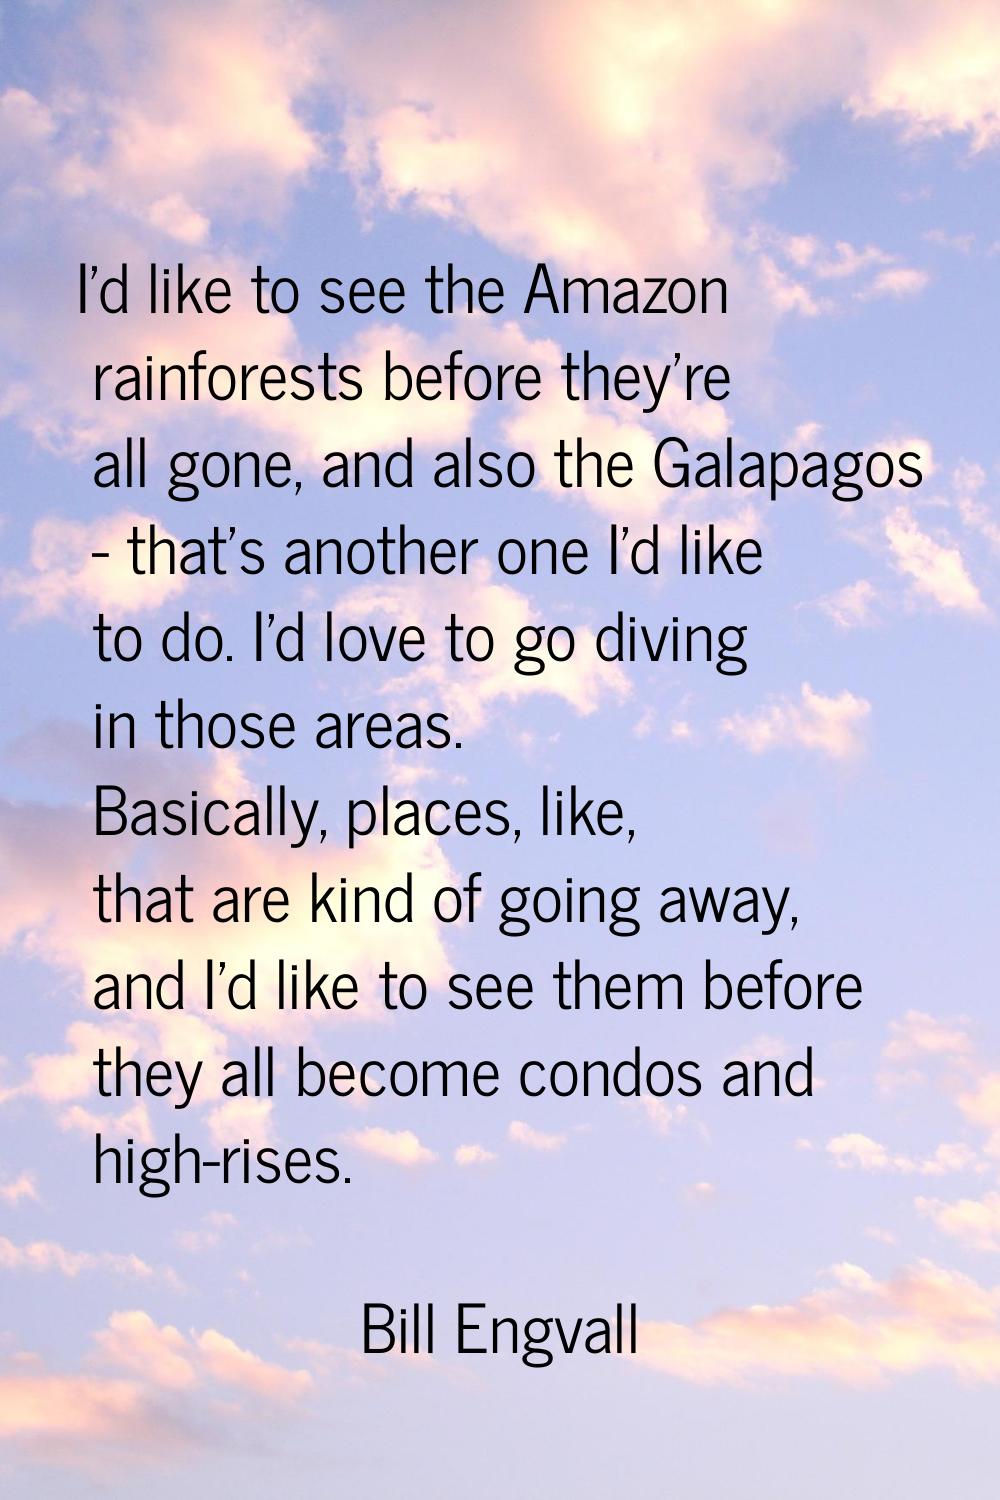 I'd like to see the Amazon rainforests before they're all gone, and also the Galapagos - that's ano